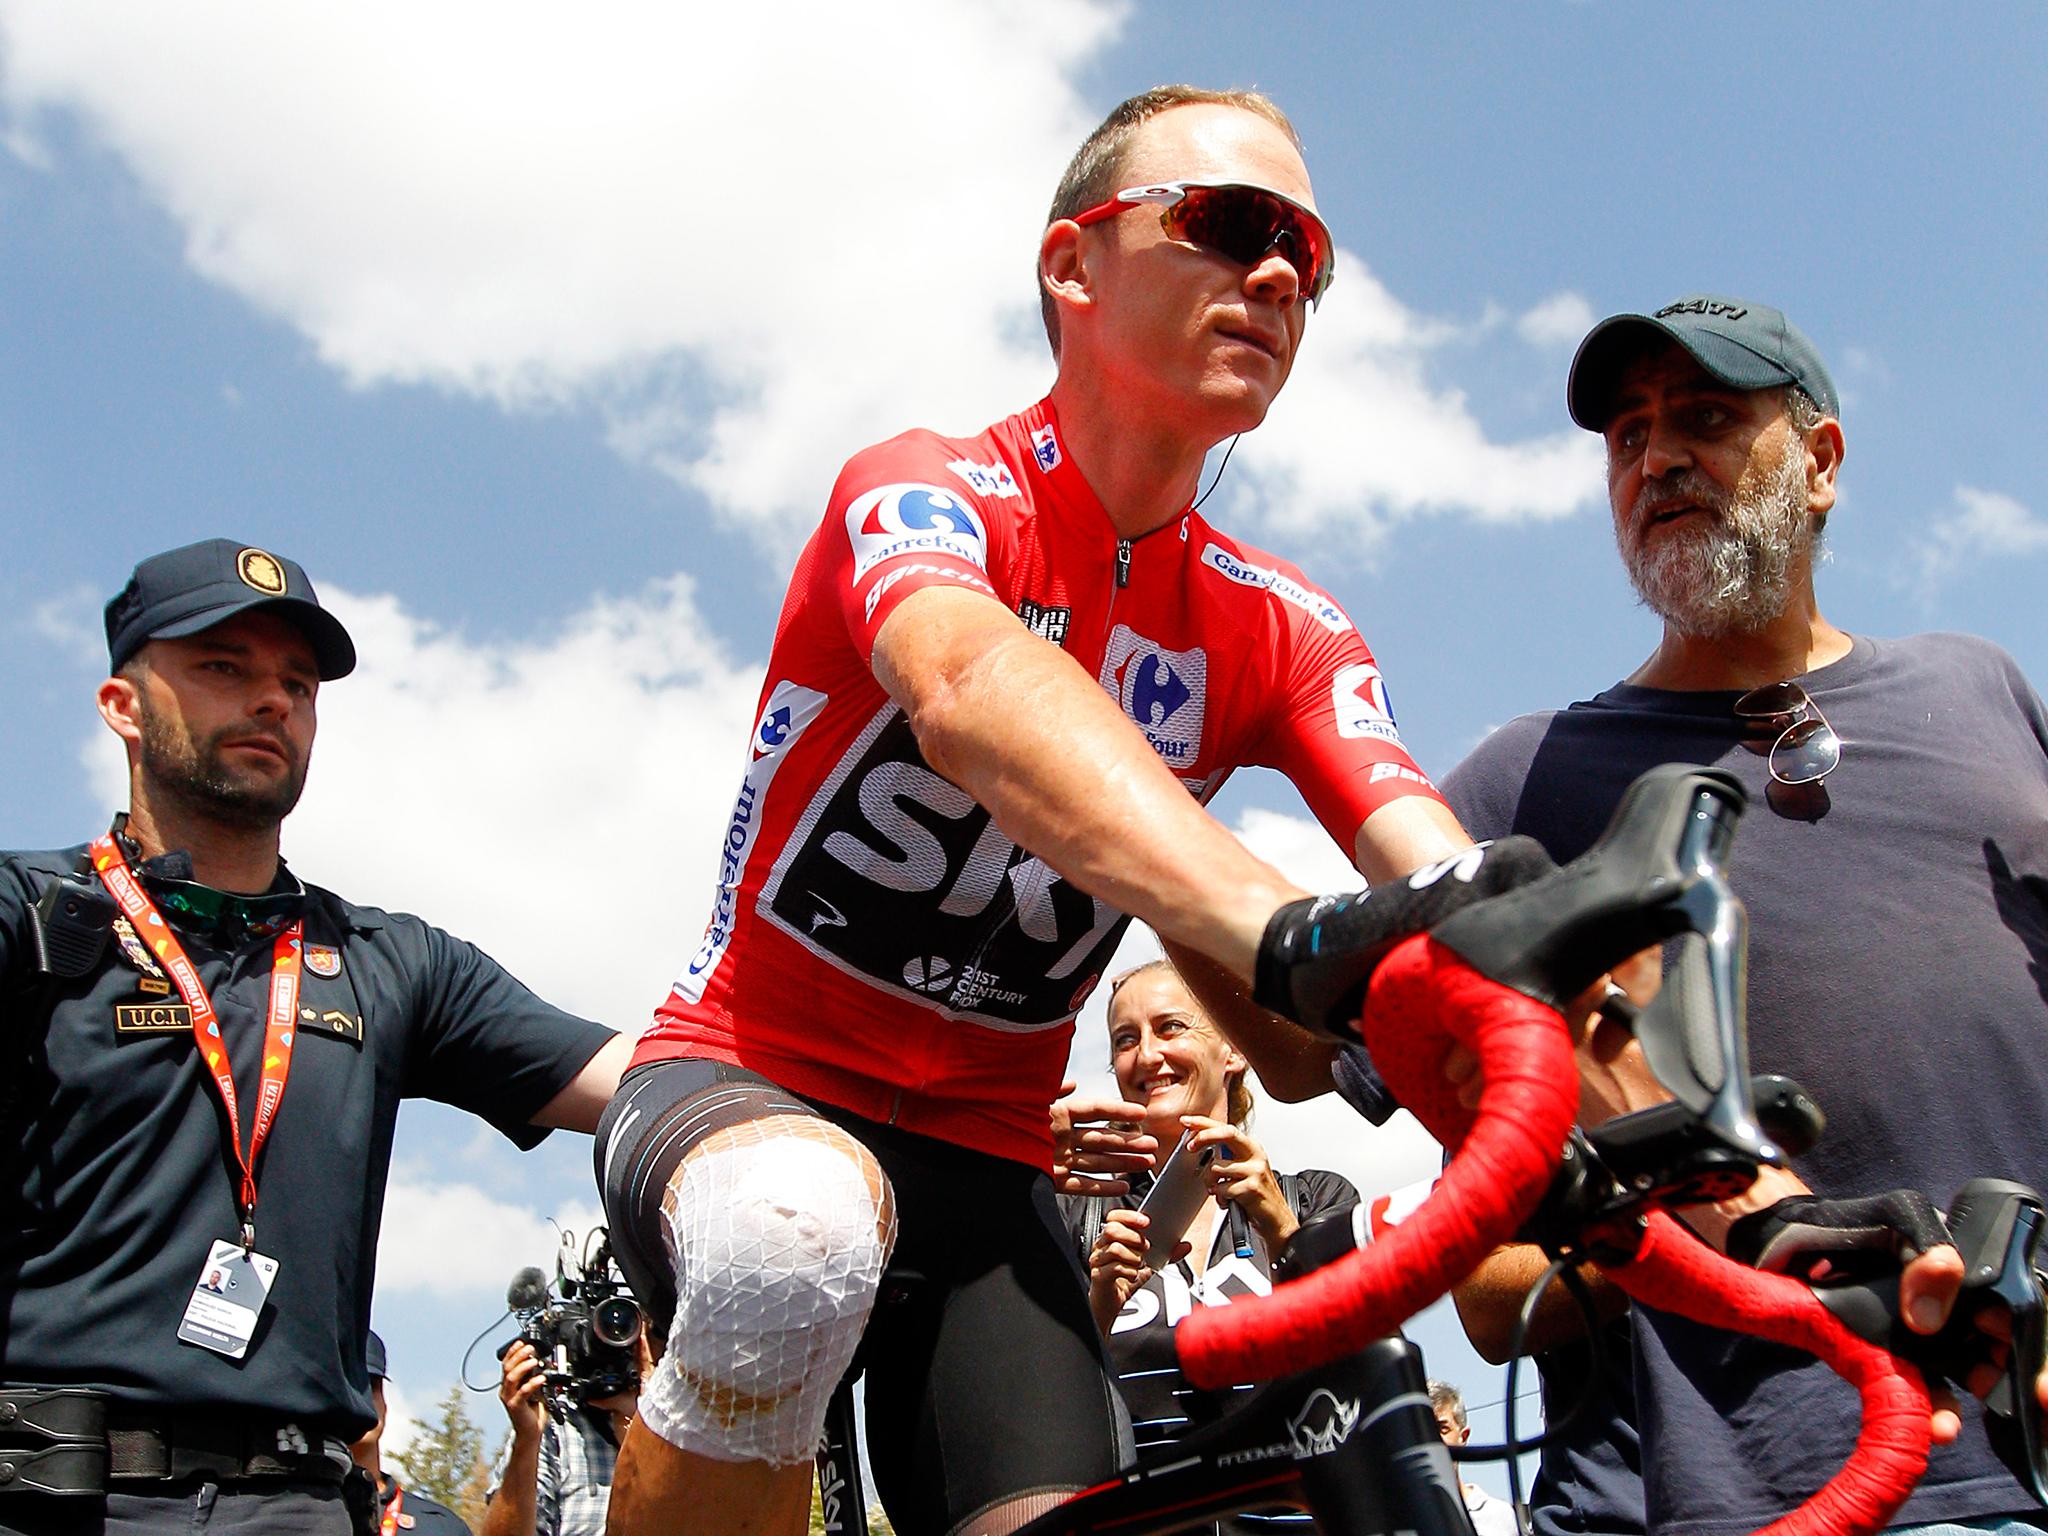 Chris Froome is facing a potential anti-doping violation